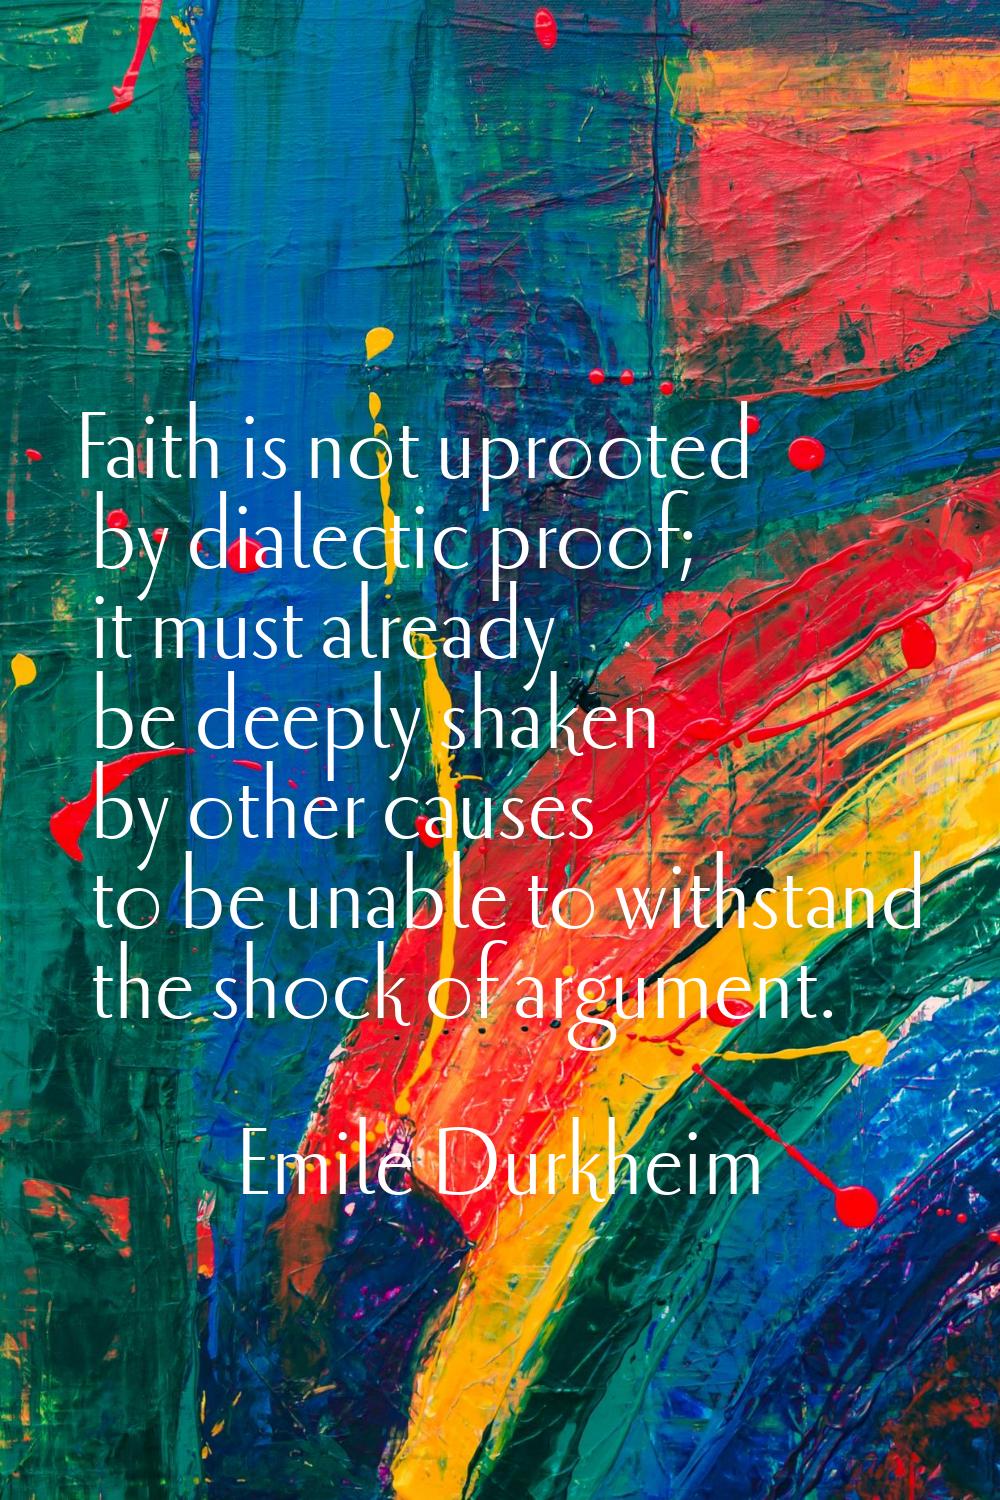 Faith is not uprooted by dialectic proof; it must already be deeply shaken by other causes to be un